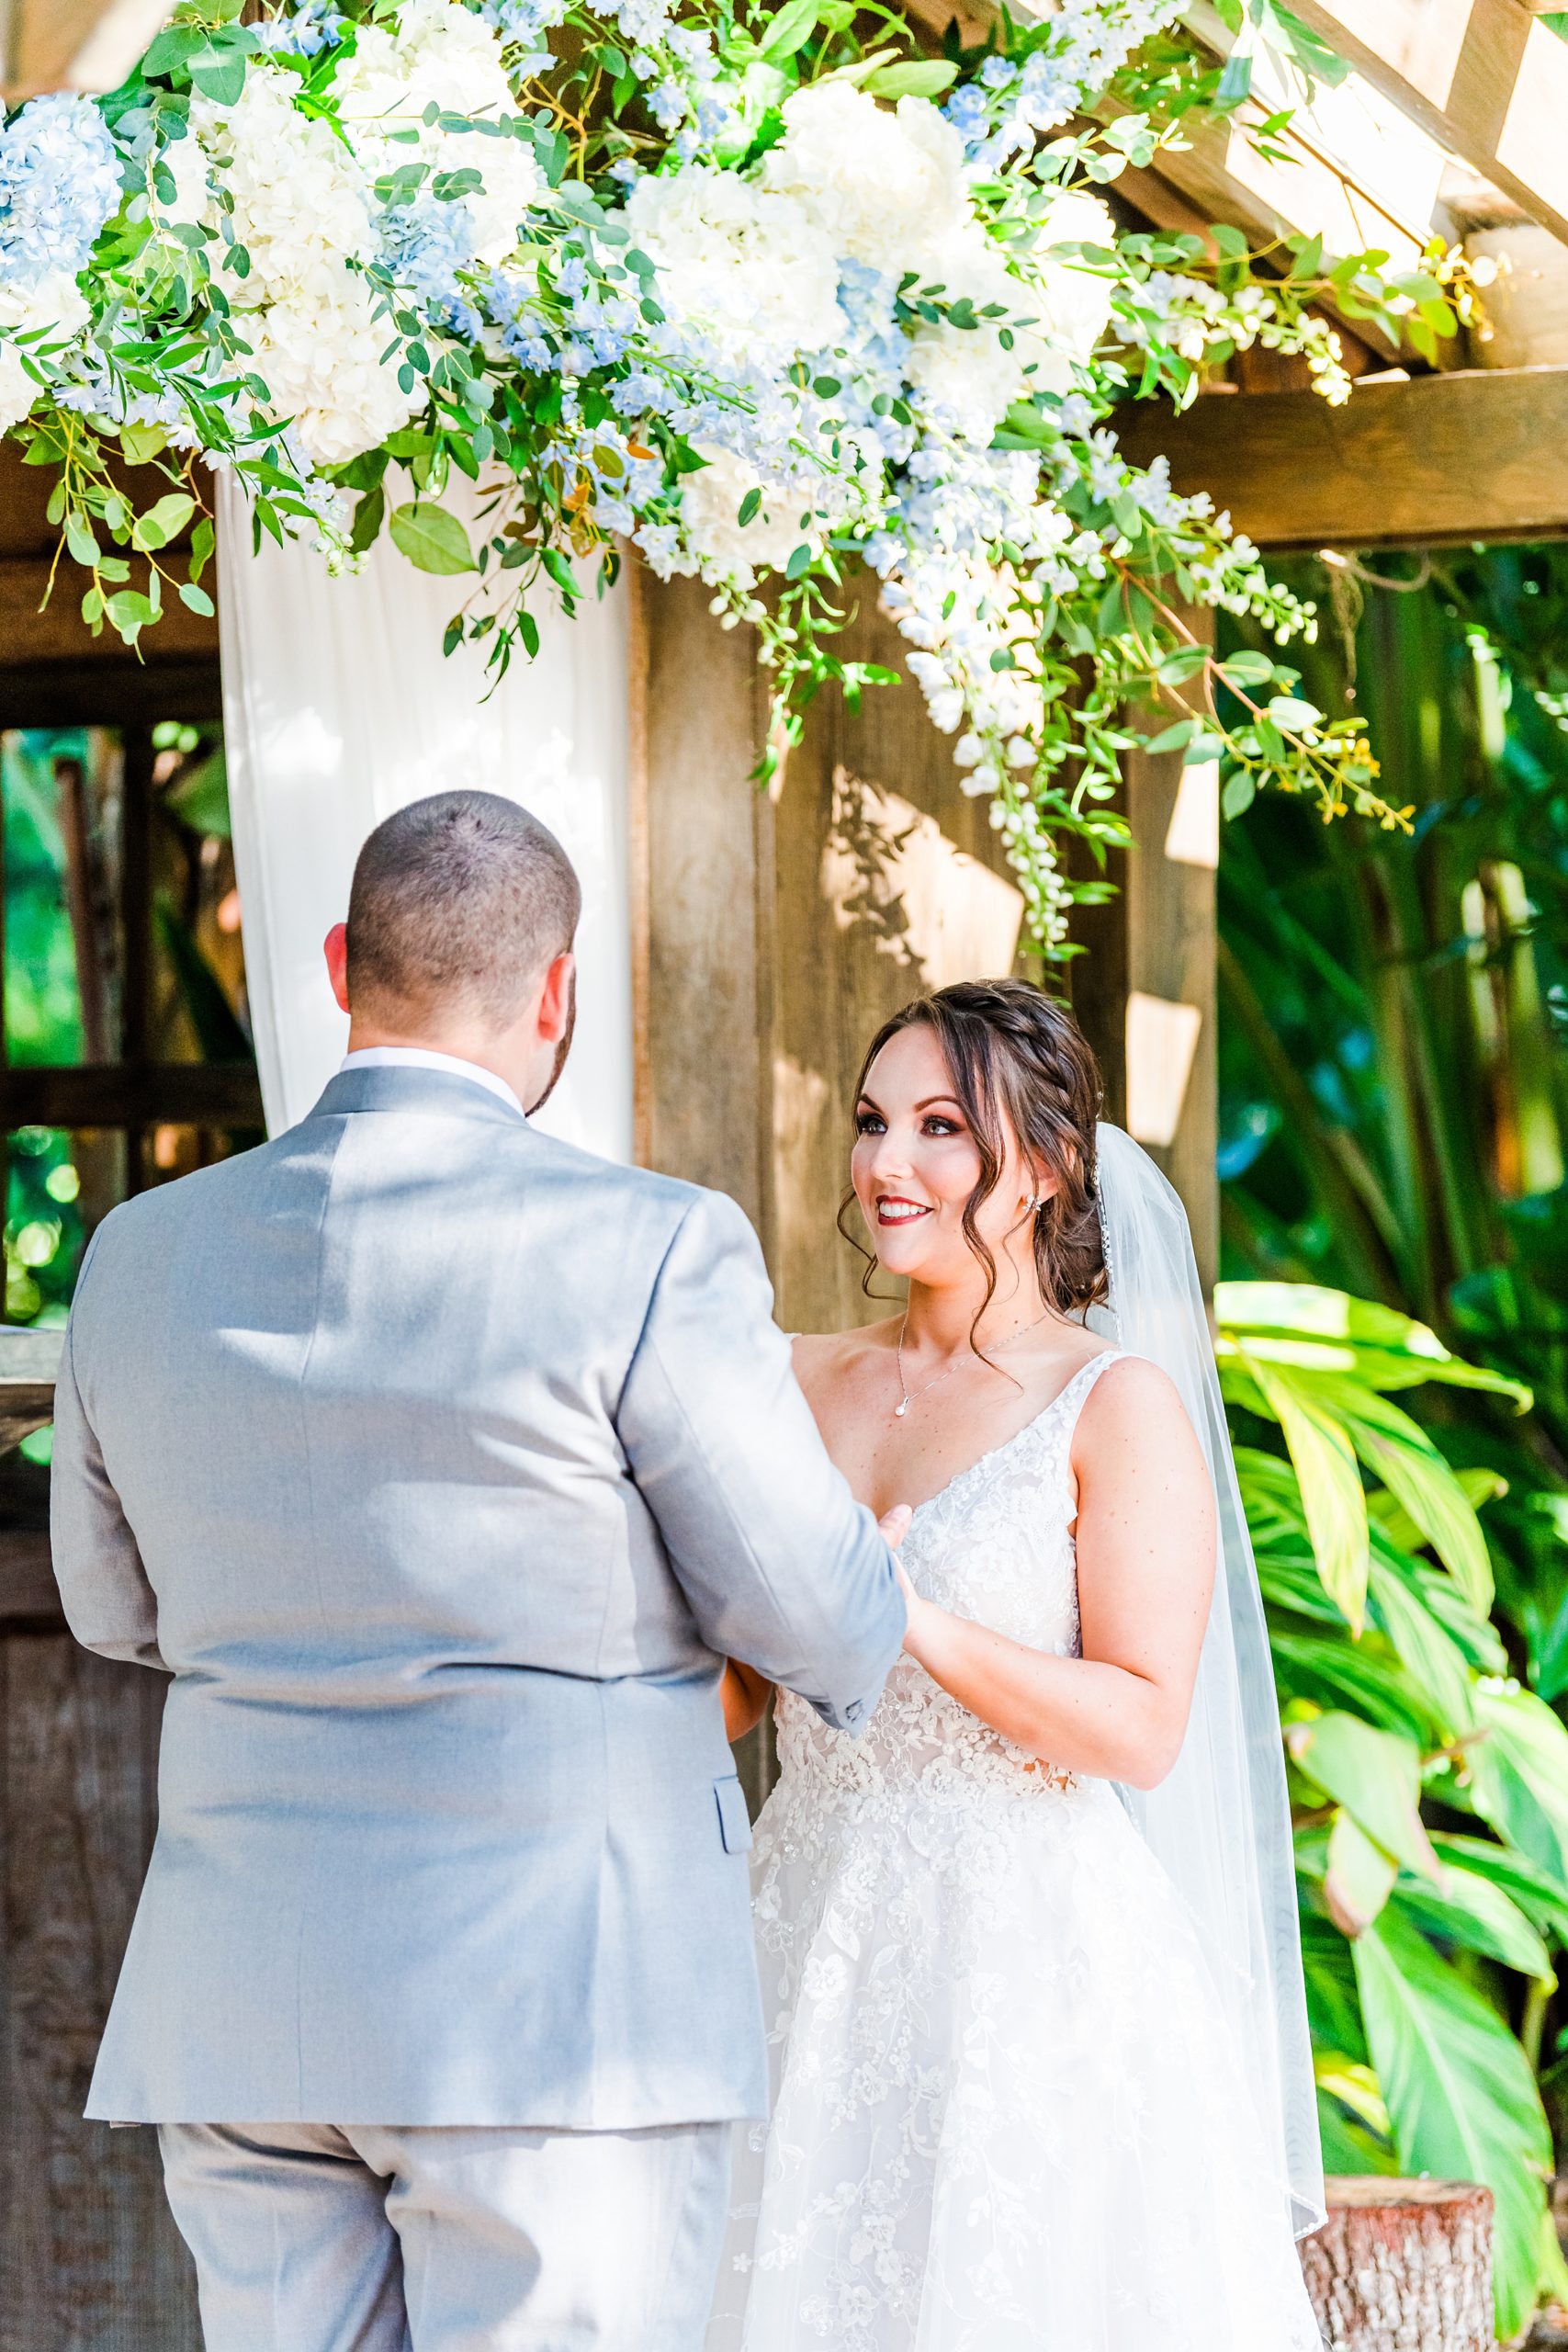 Bride at wedding ceremony | The Delamater House Wedding | Chynna Pacheco Photography-516